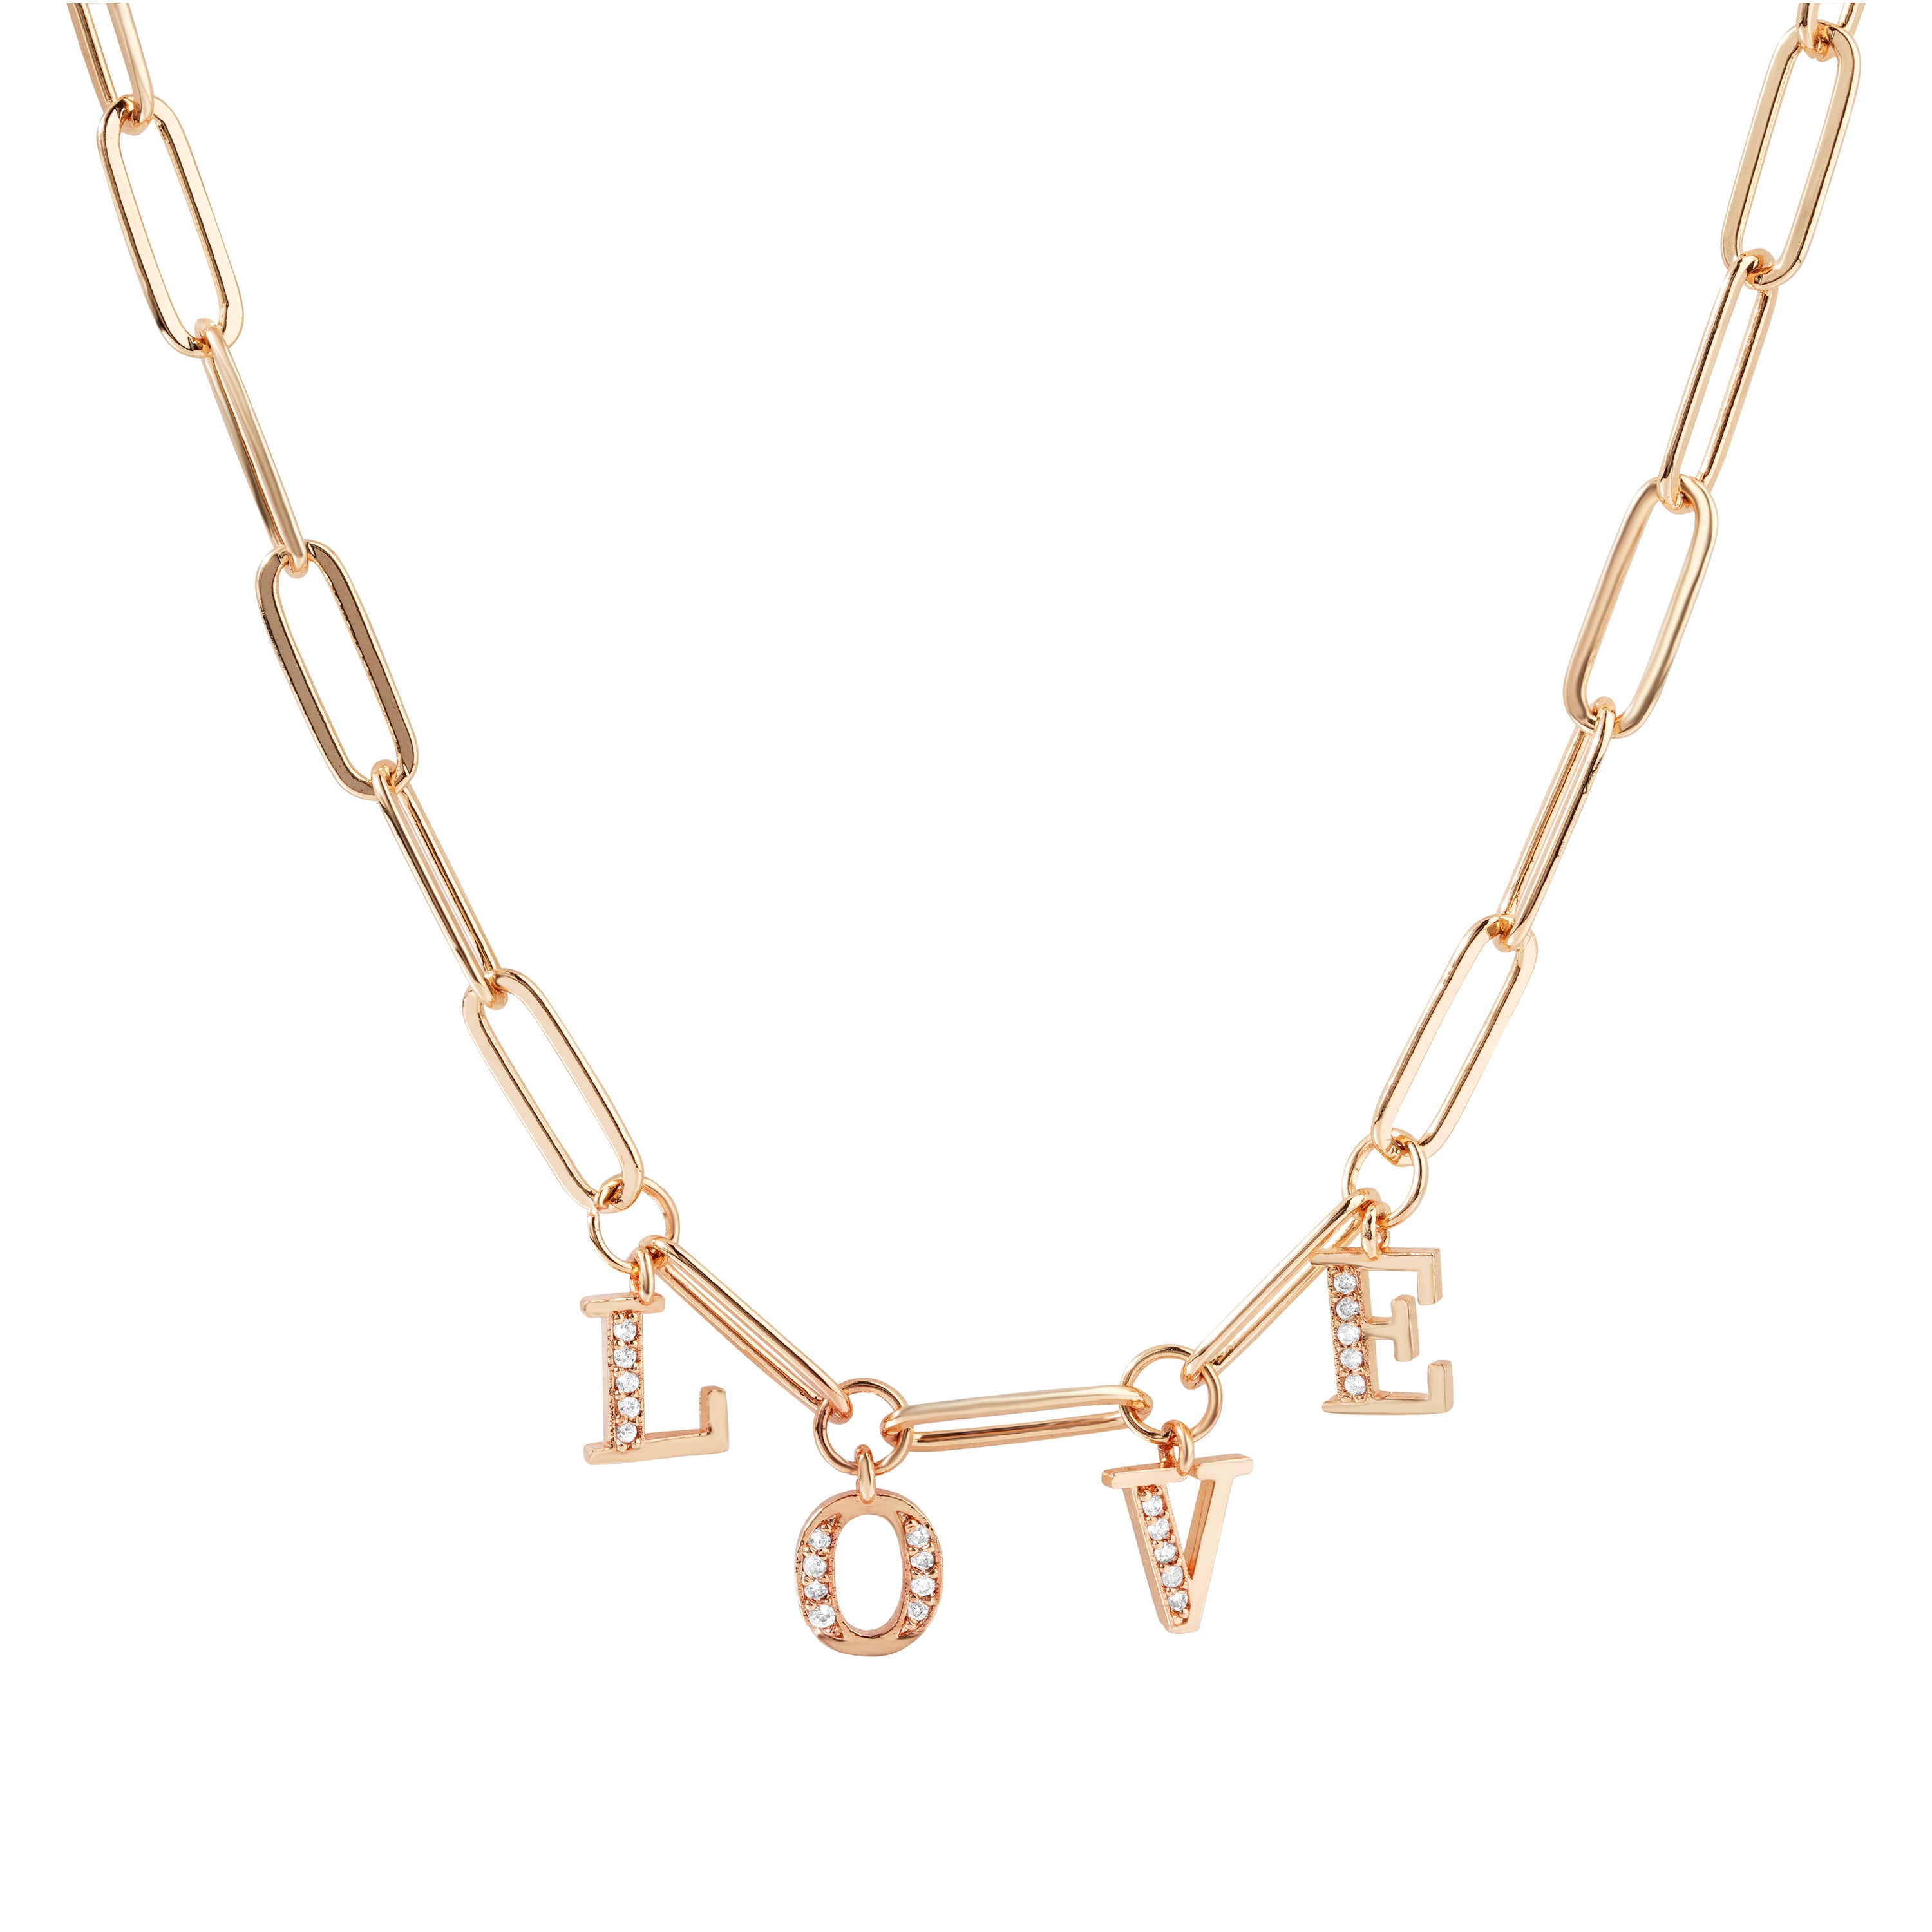 Womens White Gold Plated Chain Link Necklace With Love